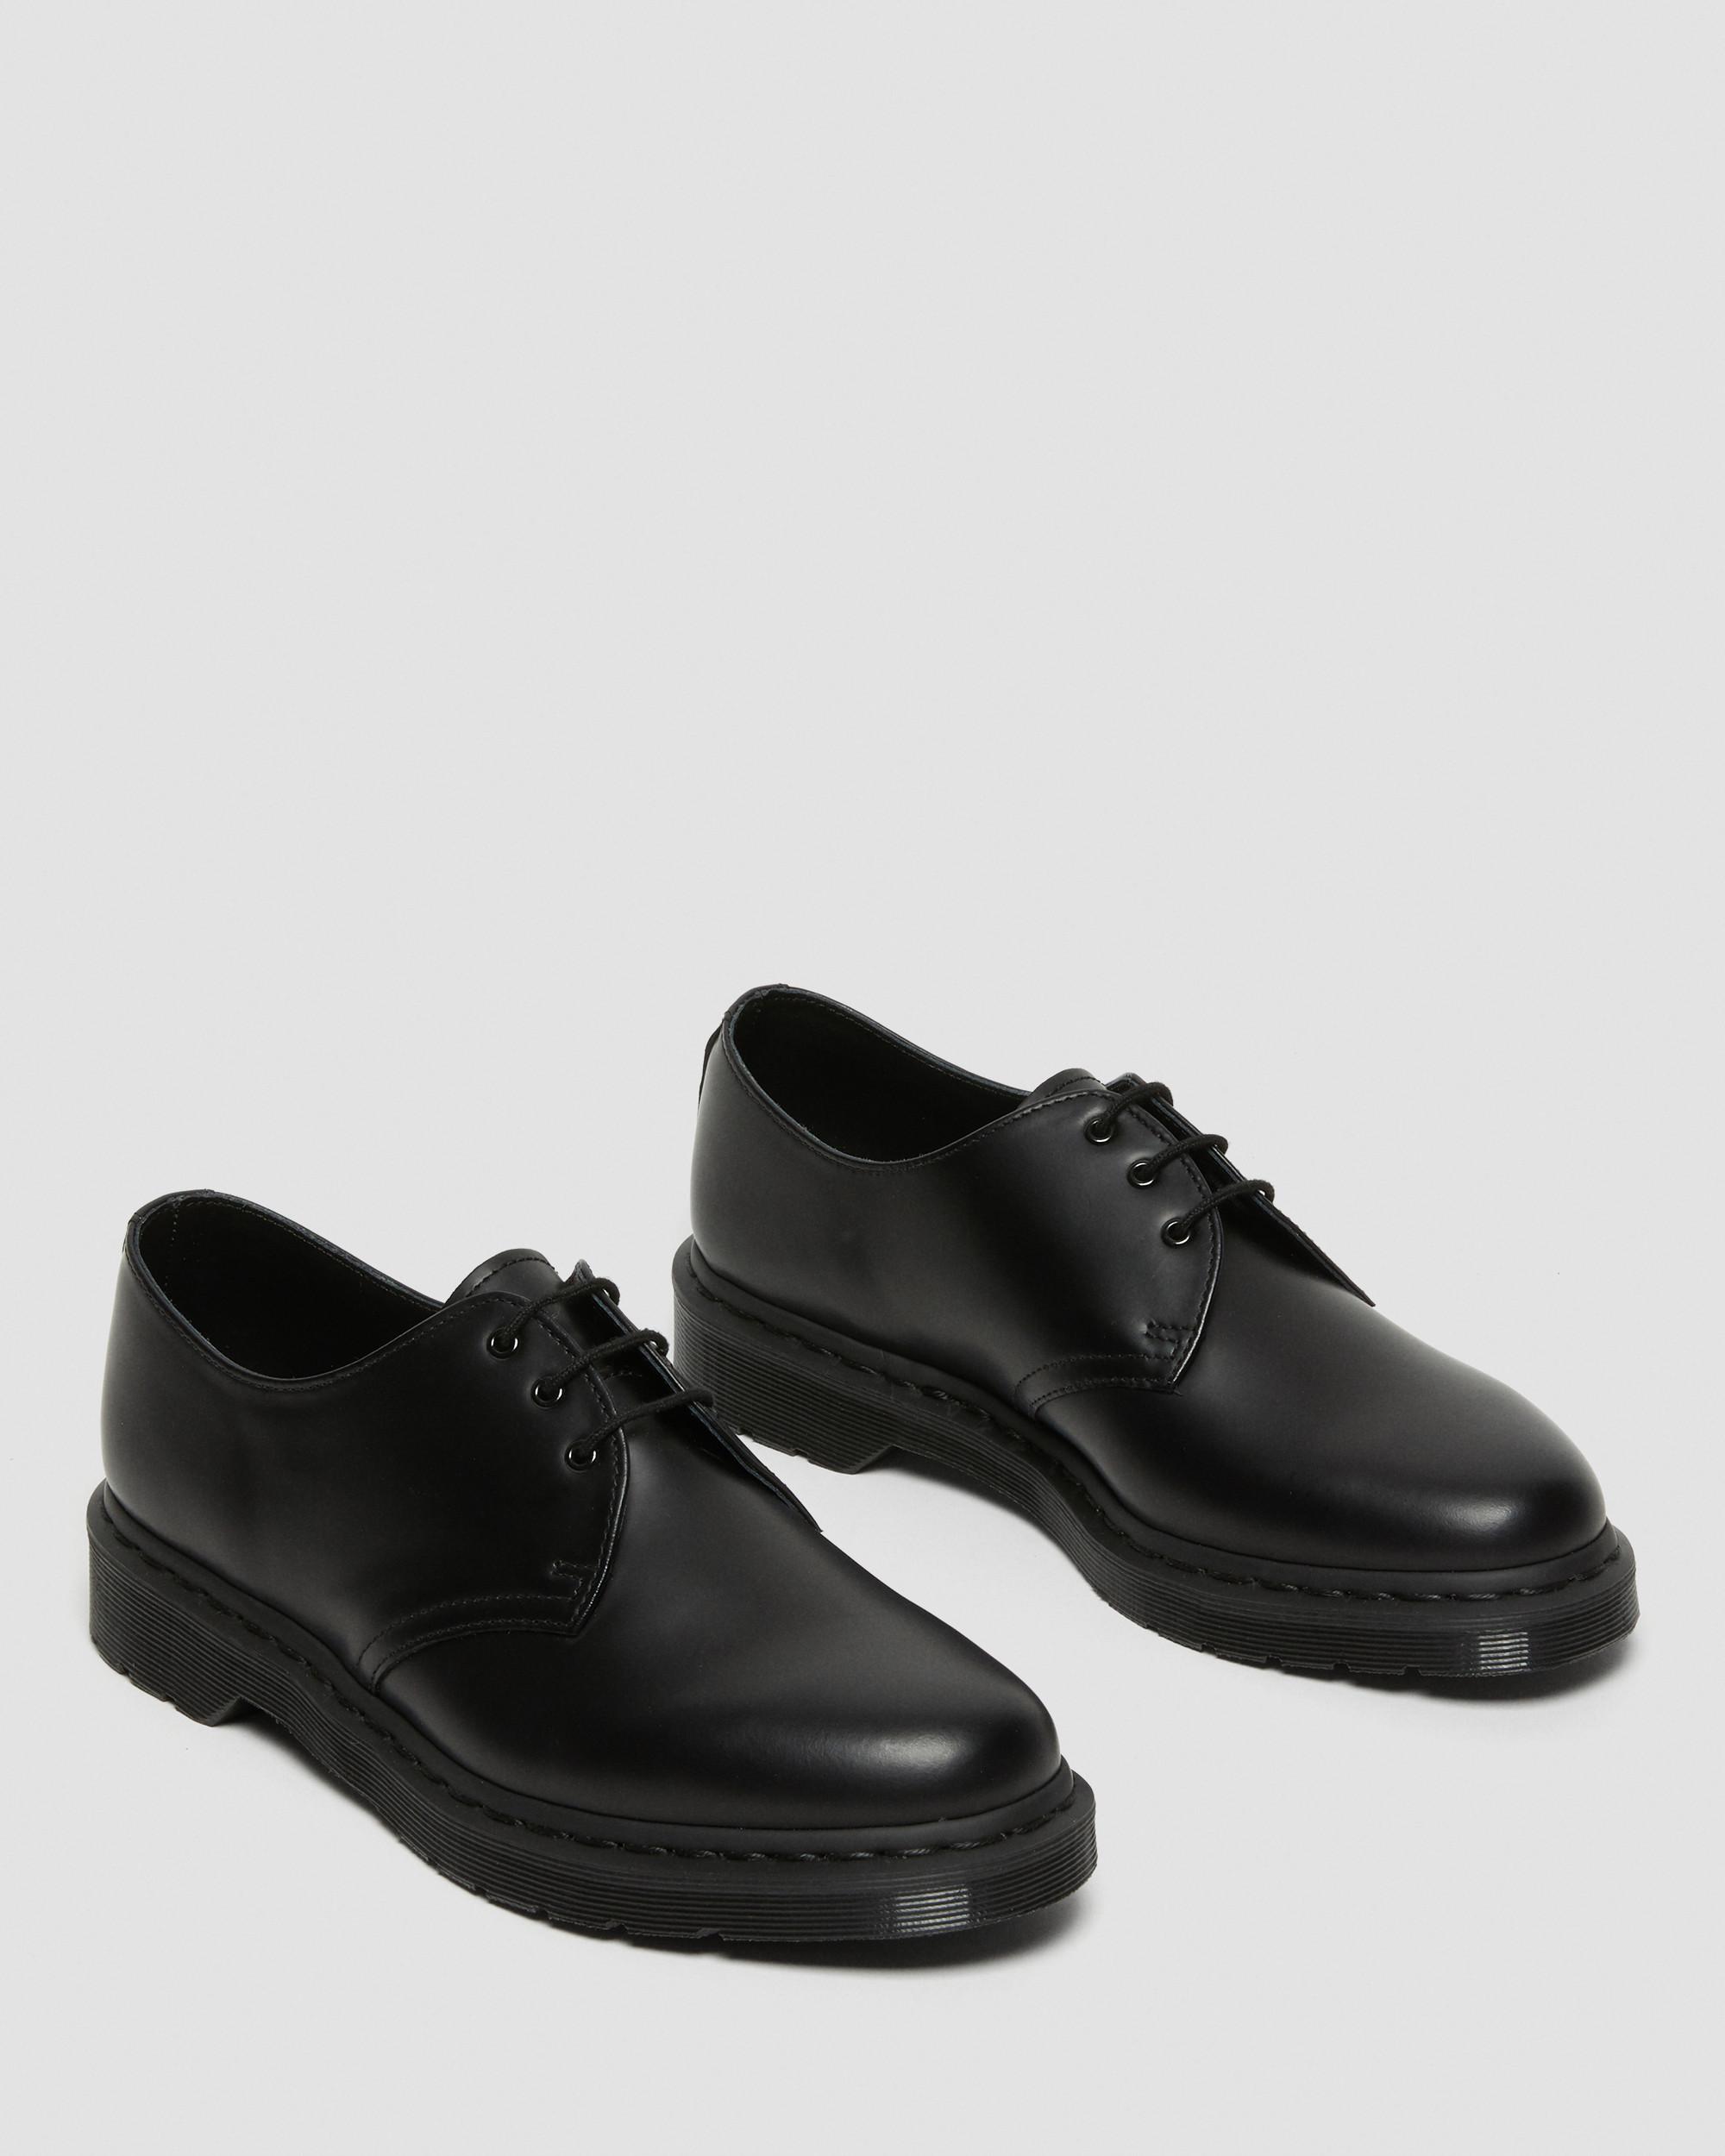 DR MARTENS 1461 MONO SMOOTH LEATHER SHOES